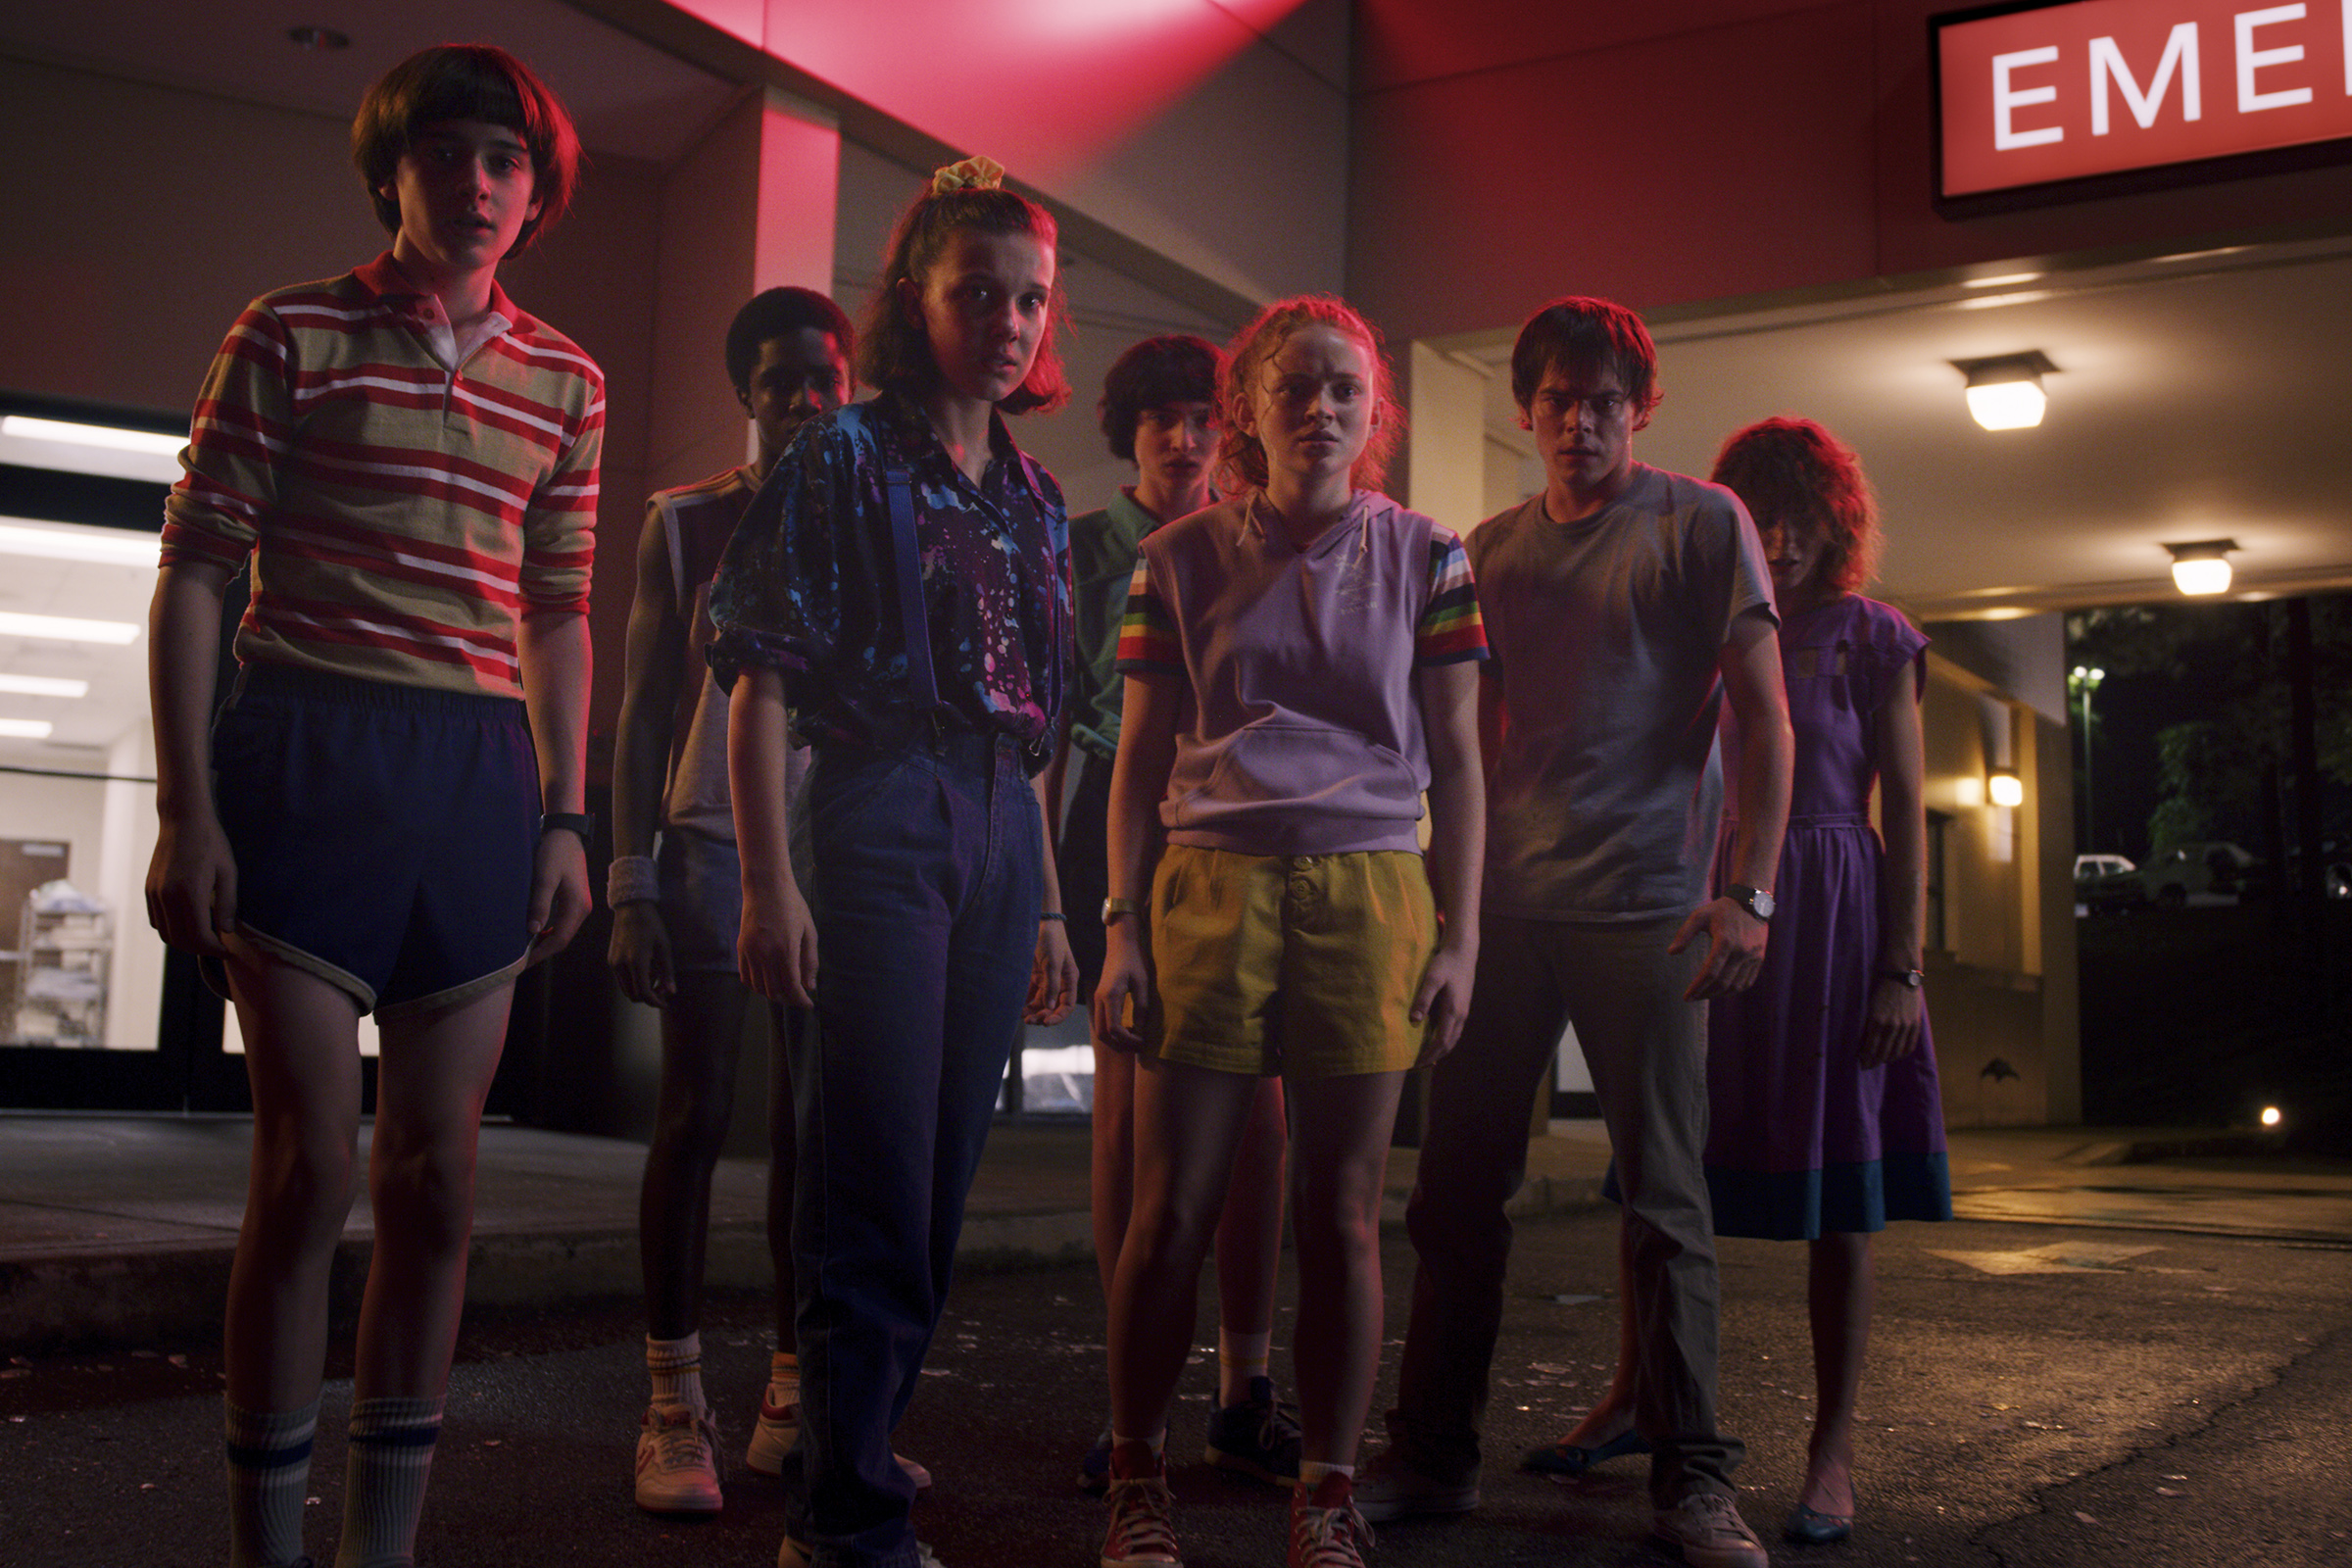 Let's discuss answers to questions about Stranger Things 3